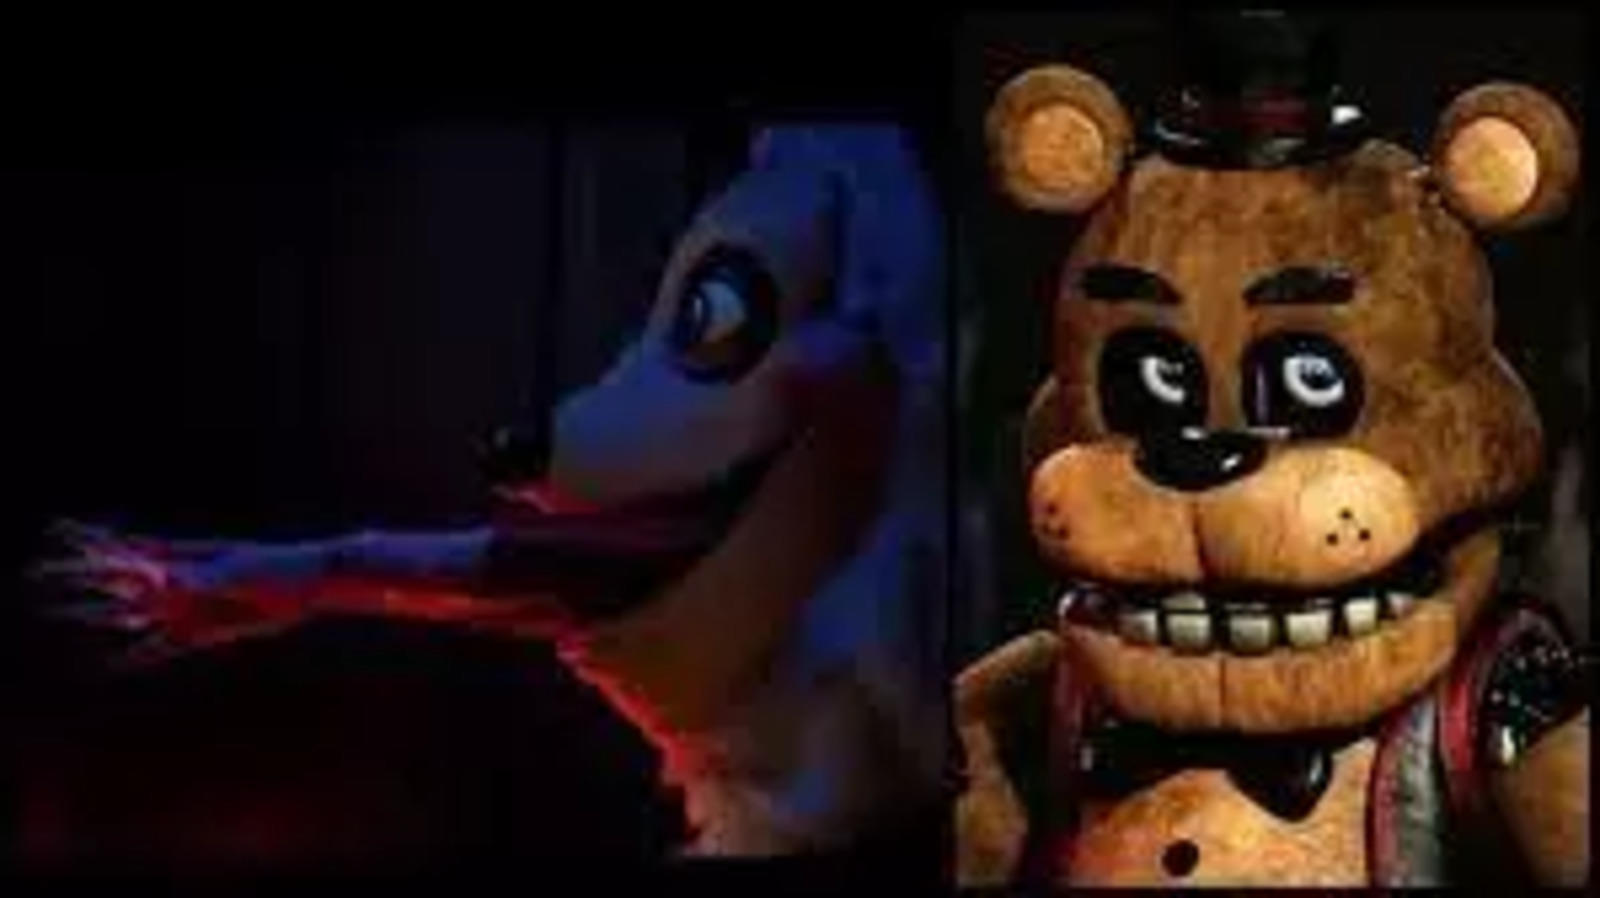 FNAF games in order  Five Nights at Freddy's release and story